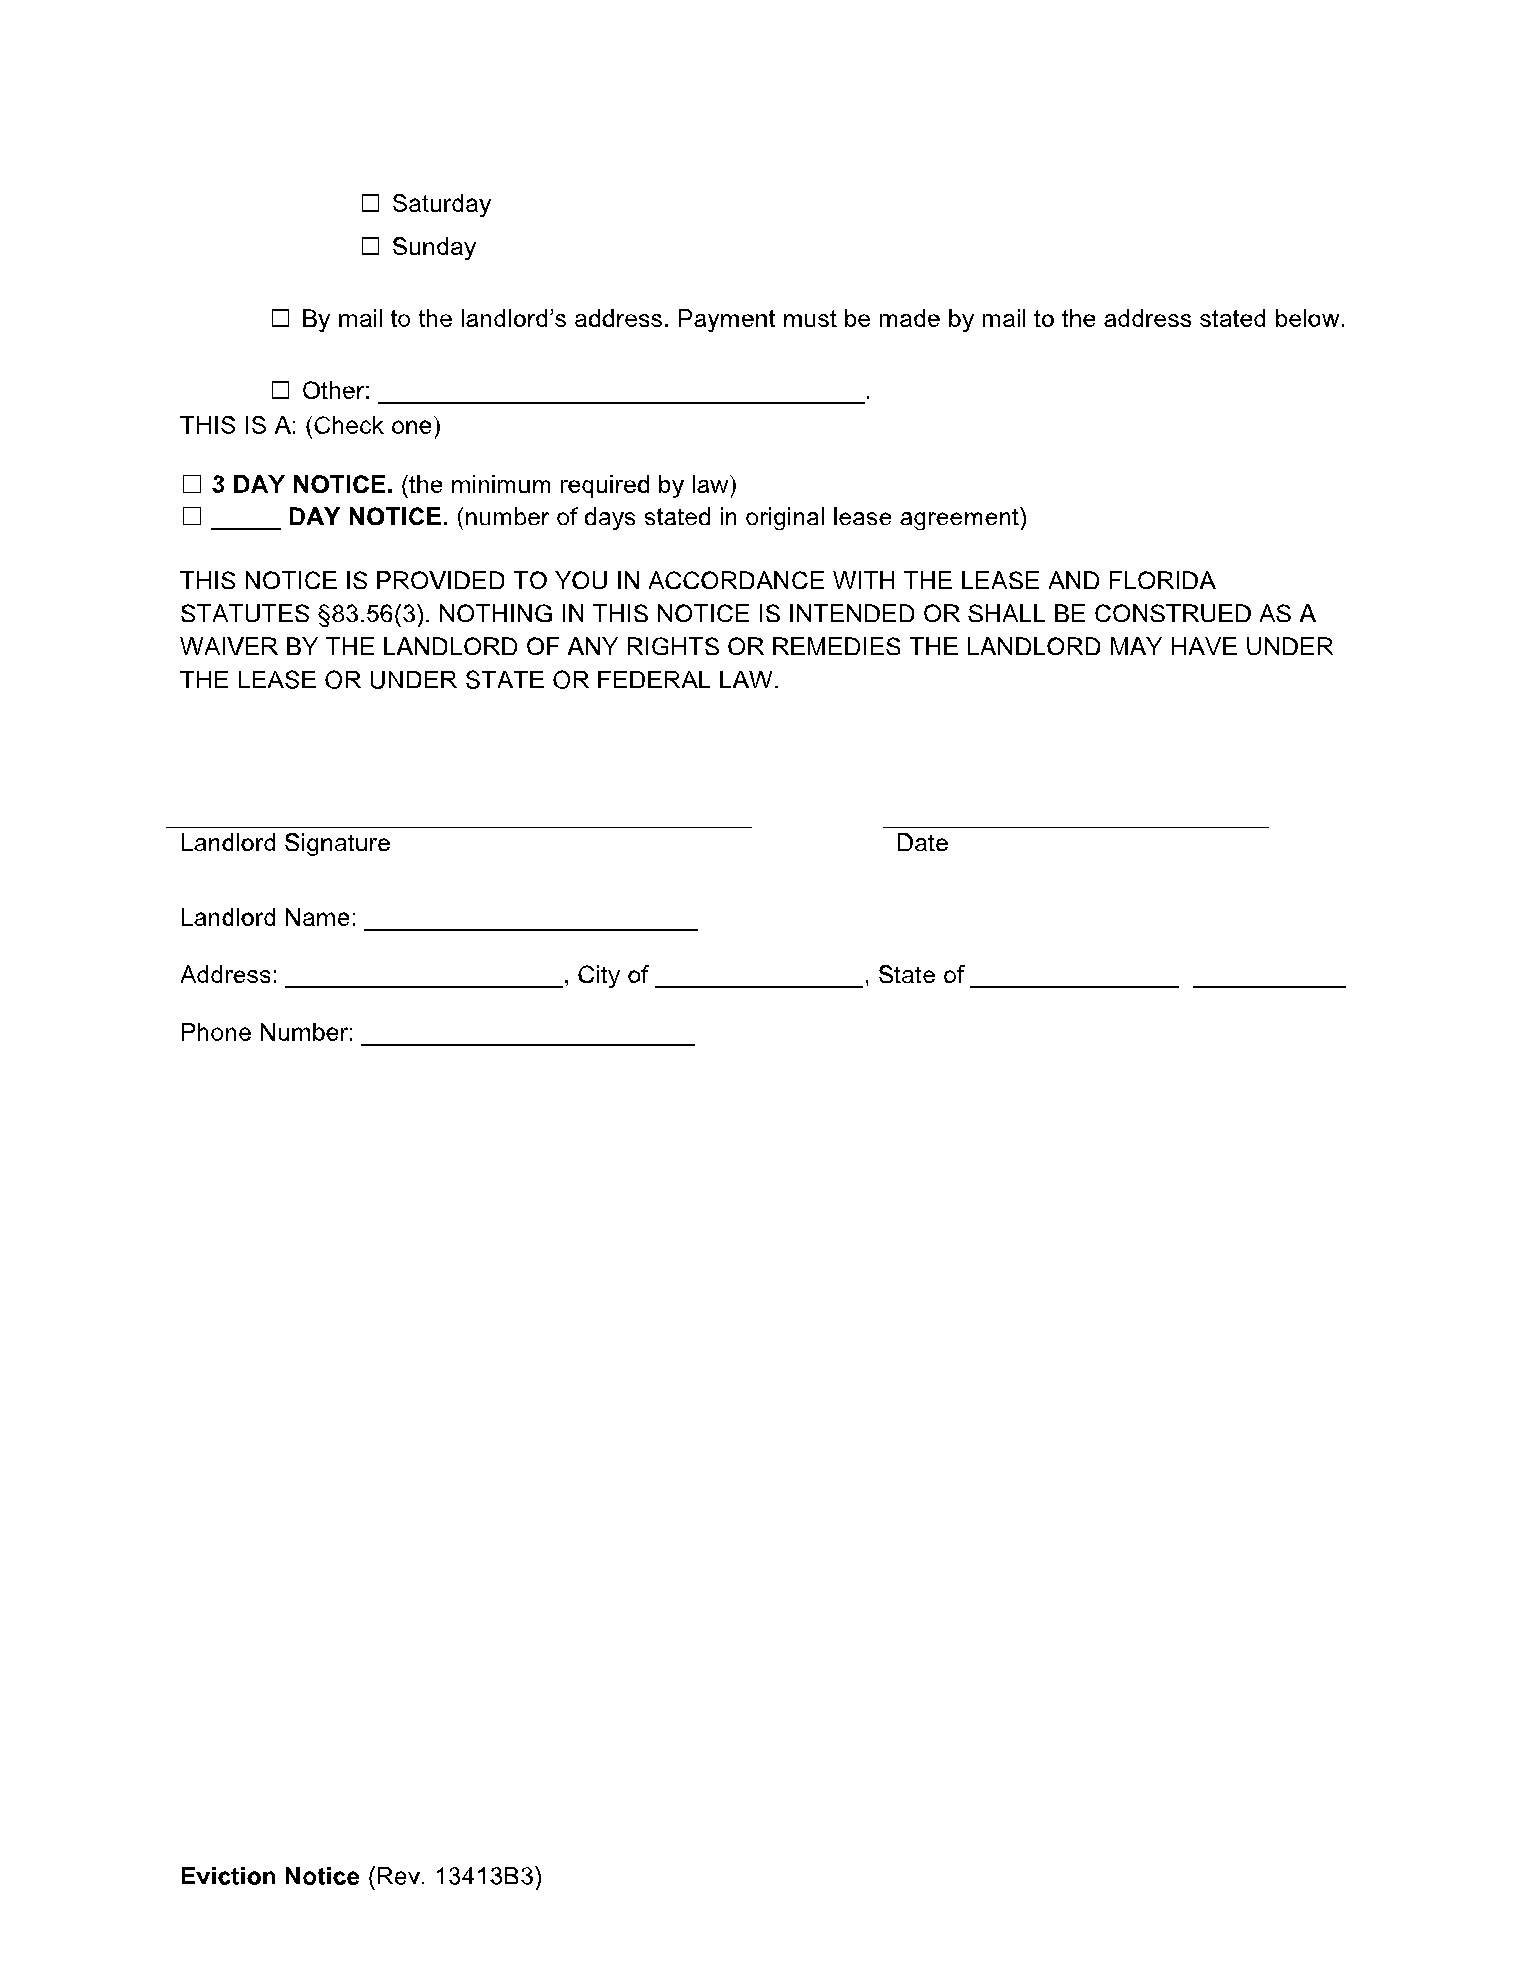 Florida 3 Day Notice Template